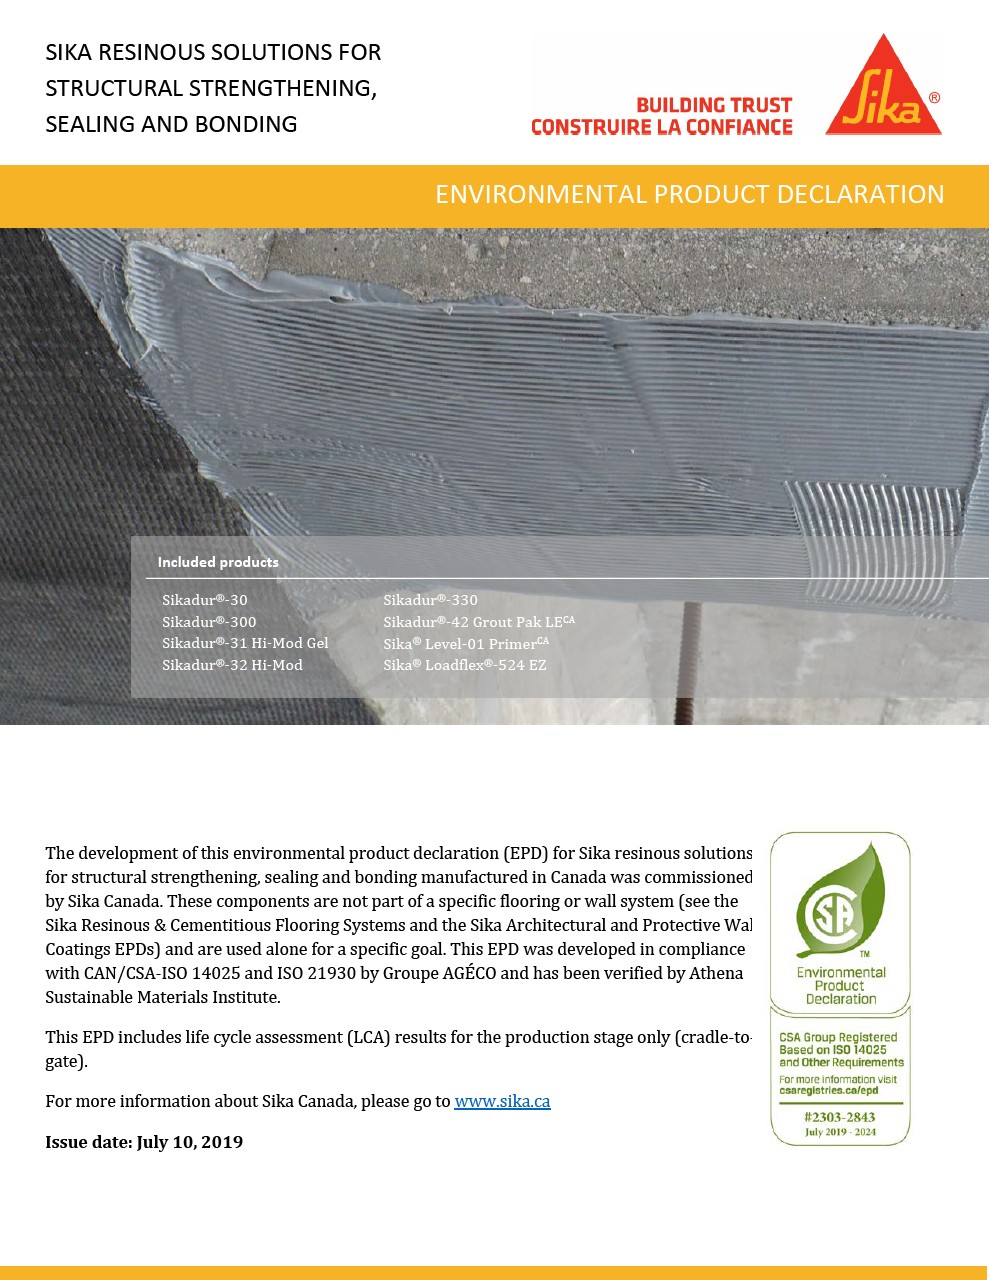 Environmental Product Declaration - Sika Resinous Solutions for Structural Strengthening, Sealing and Bonding